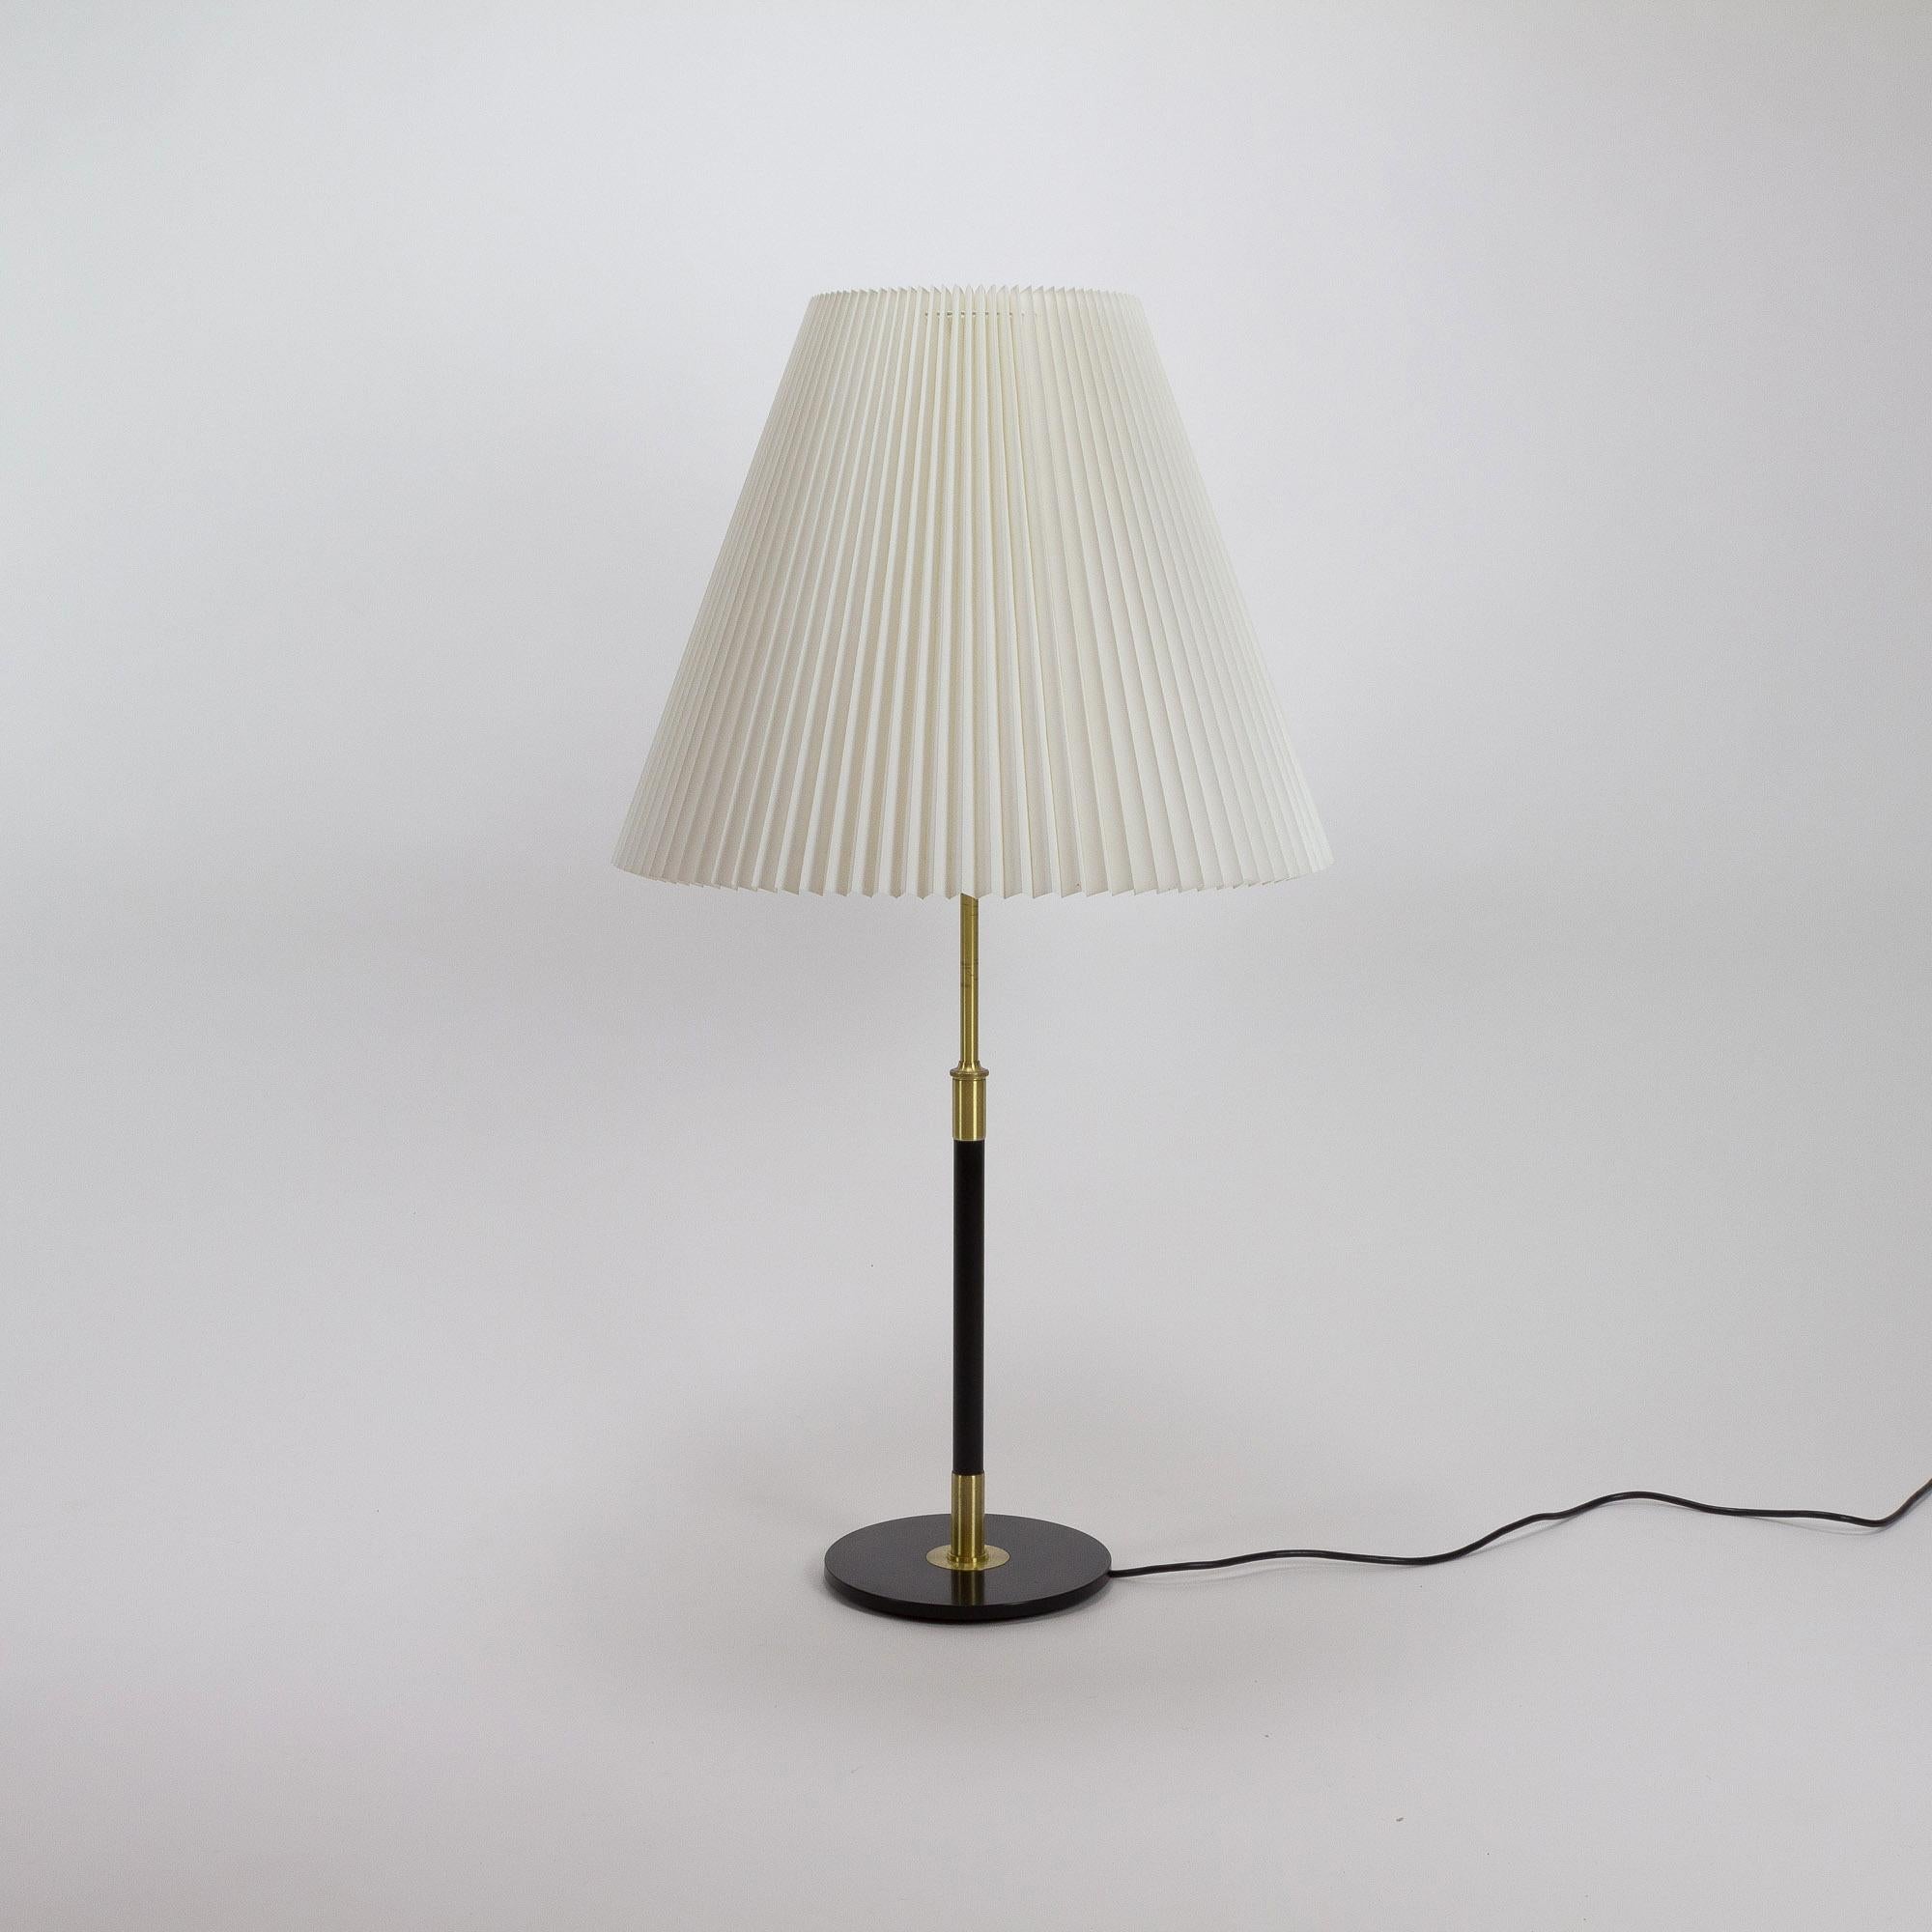 Model 352 adjustable table lamp by Aage Petersen for Le Klint Denmark in 1972 in brass and black lacquered metal. The 352 can be used on a desk, side table or sideboard and even on the floor. The height adjusts from 62cm to 88cm and the large Le